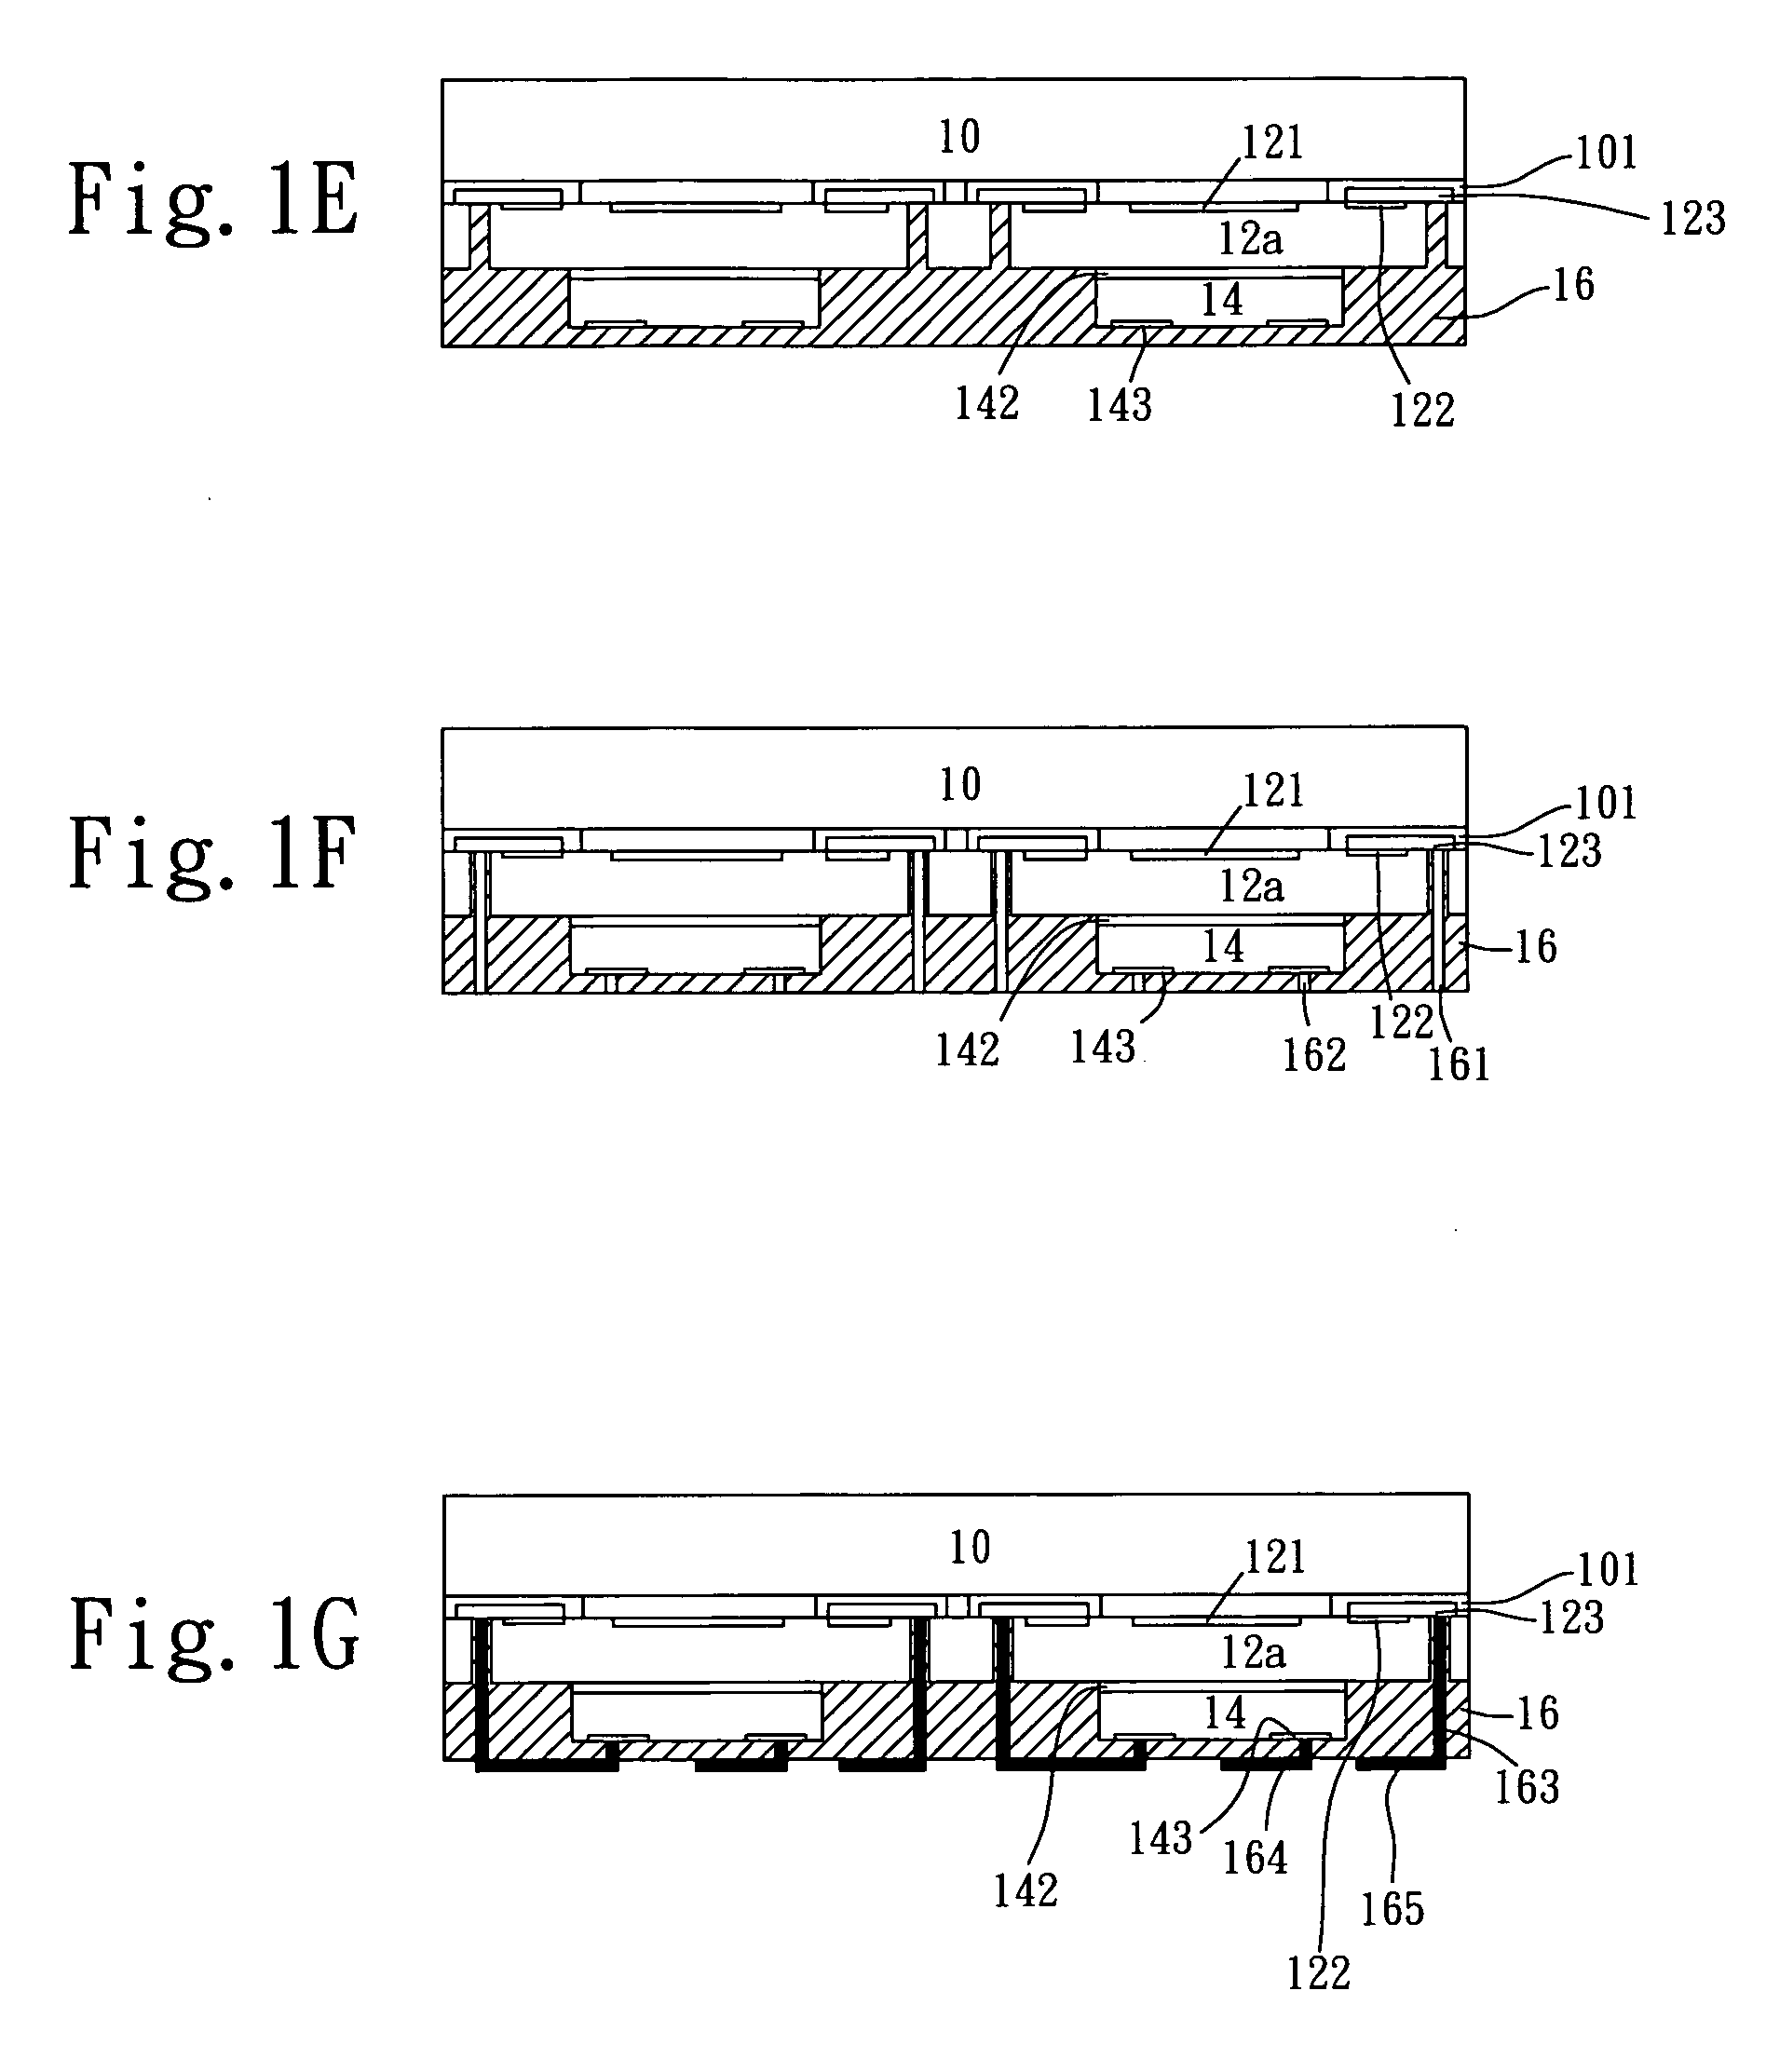 Image sensor module with a three-dimensional die-stacking structure